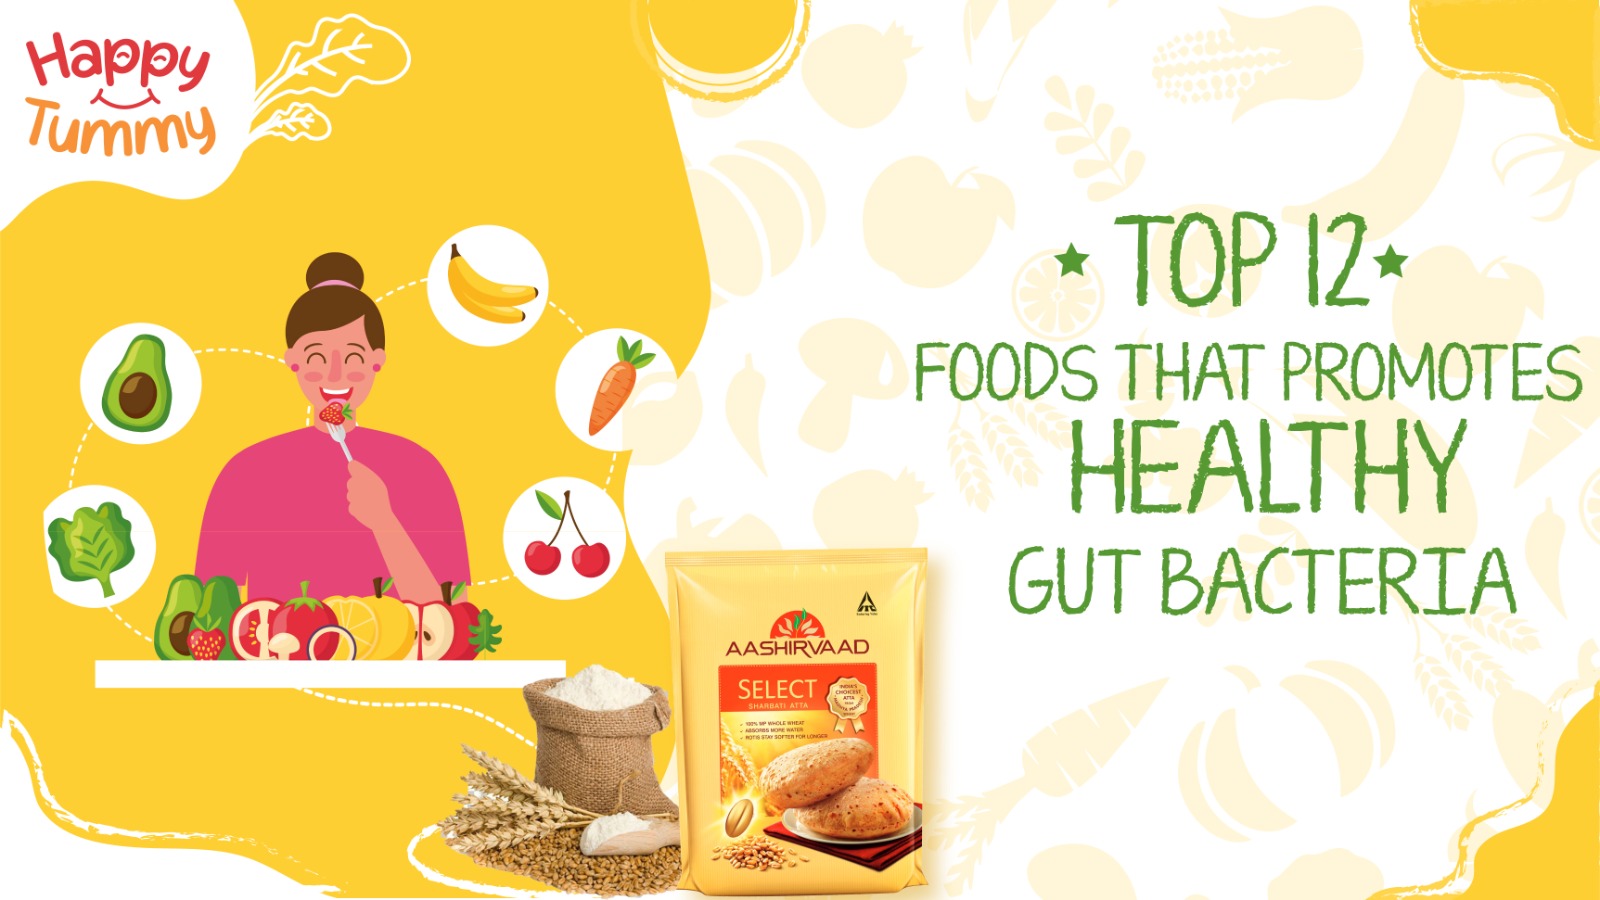 Top 12 Foods That Promote Healthy Gut Bacteria